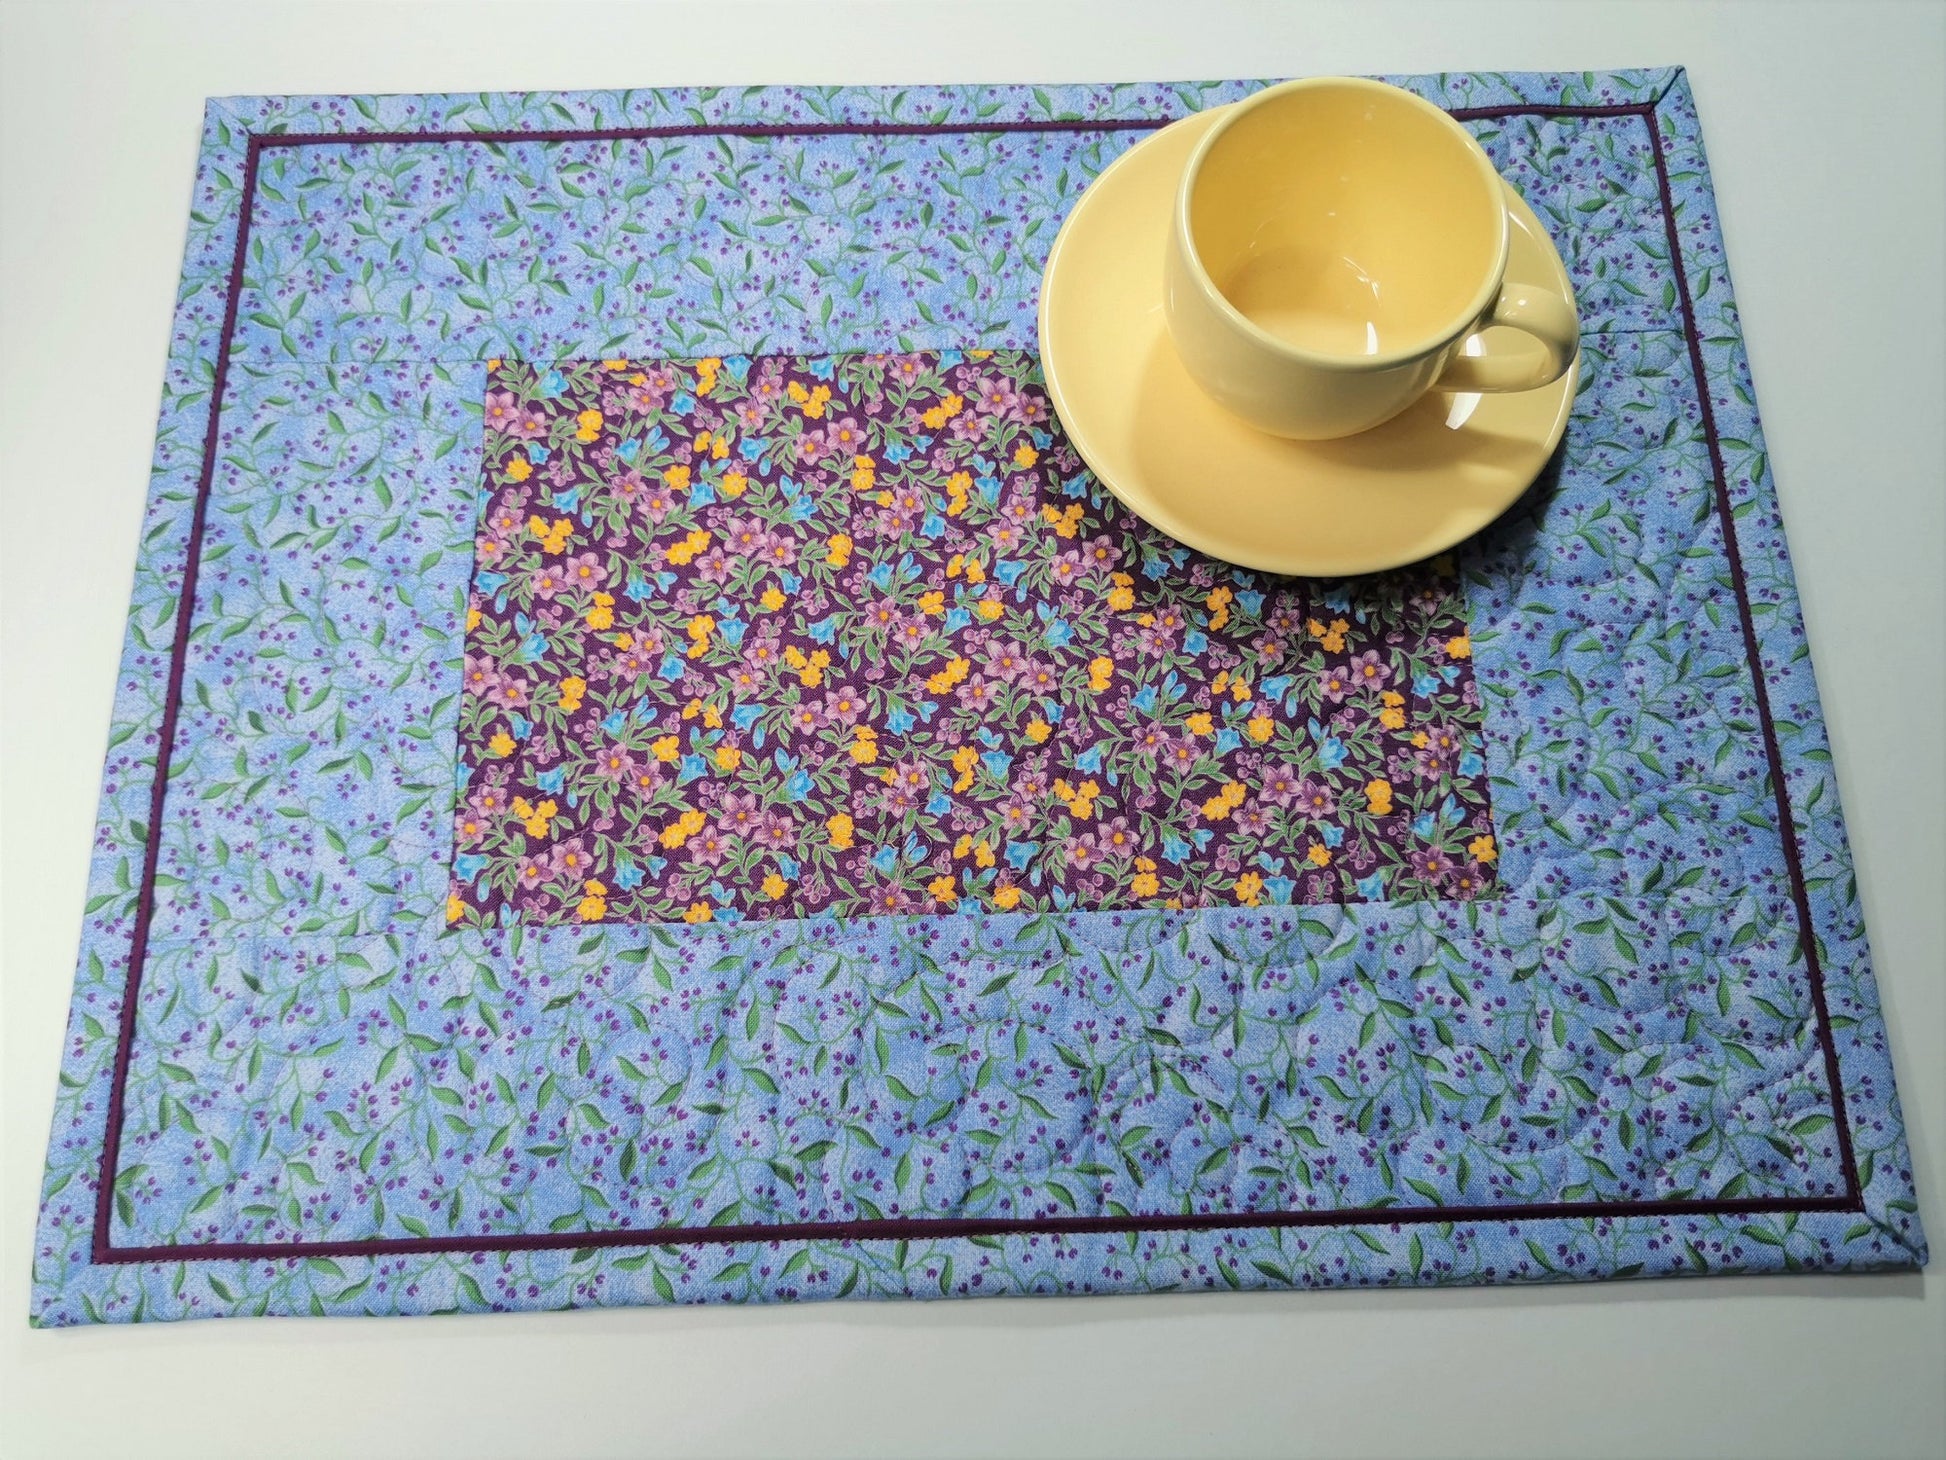 Overhead view of the placemat shown with a small yellow tea cup. The placemats are predominantly a pretty sky blue with purple as a secondary color. The purple floral print in the center has golden yellow flowers scattered throughout. A key feature of the placemats is the flanged binding which gives a pretty framing effect.